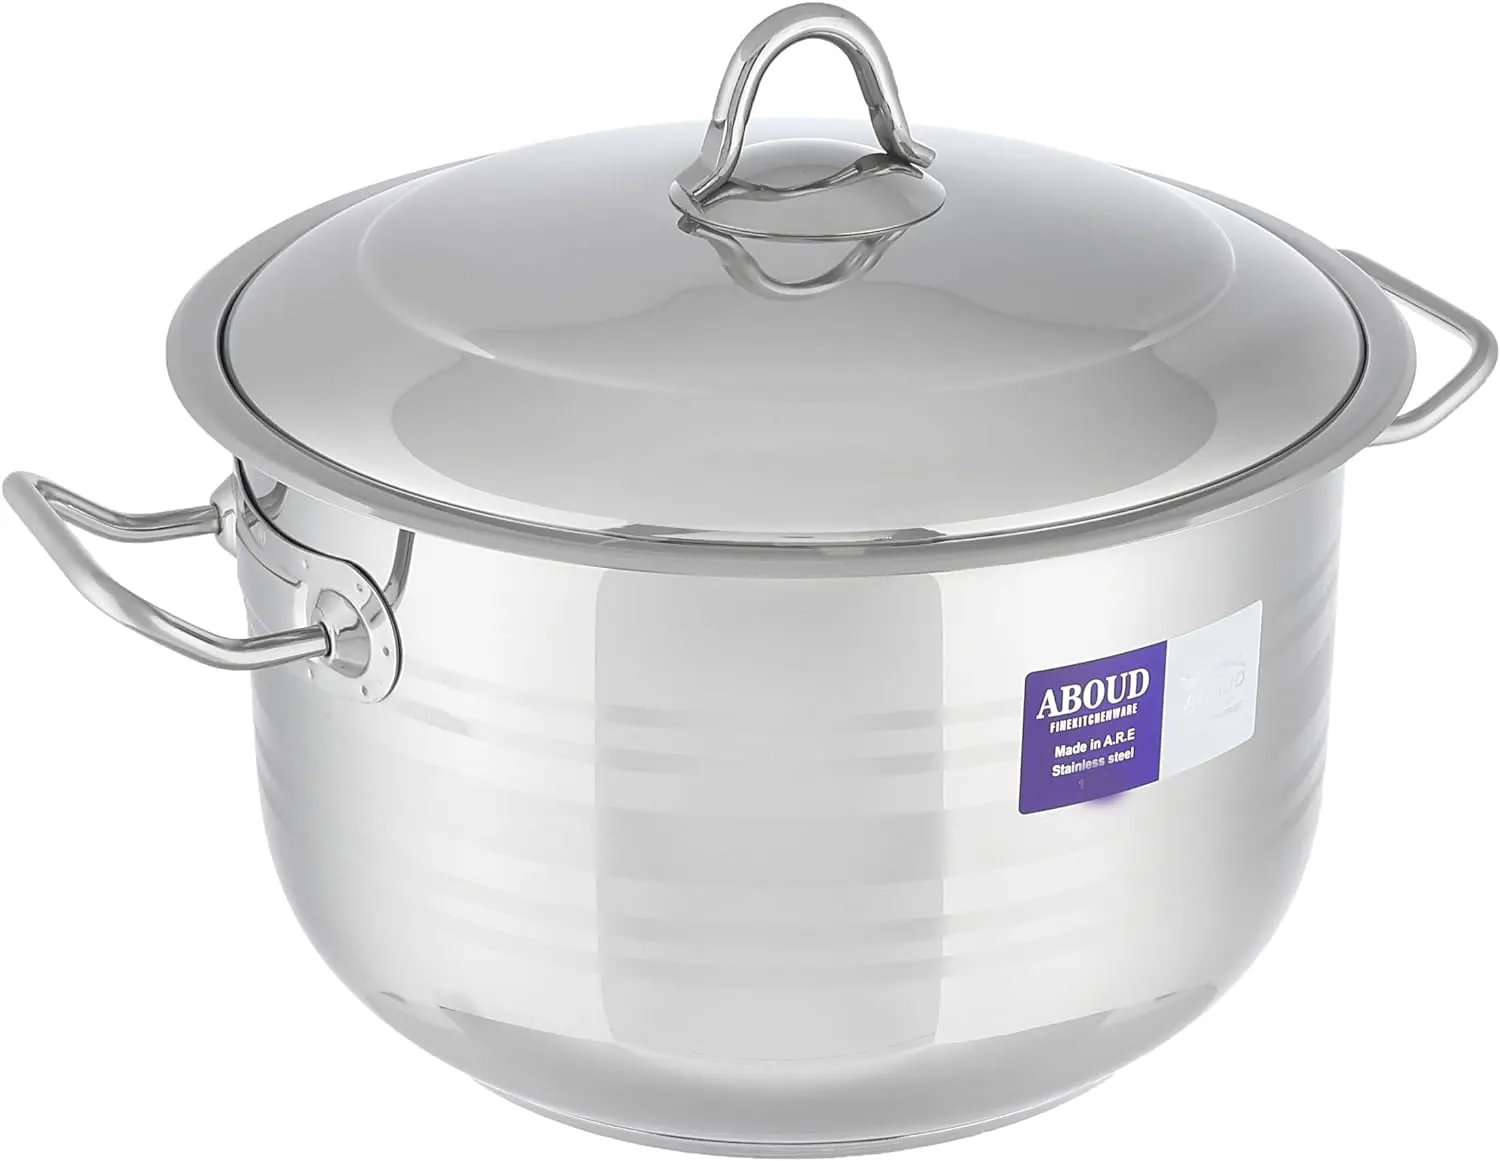 Aboud Striped stainless steel pot , size 30, silver